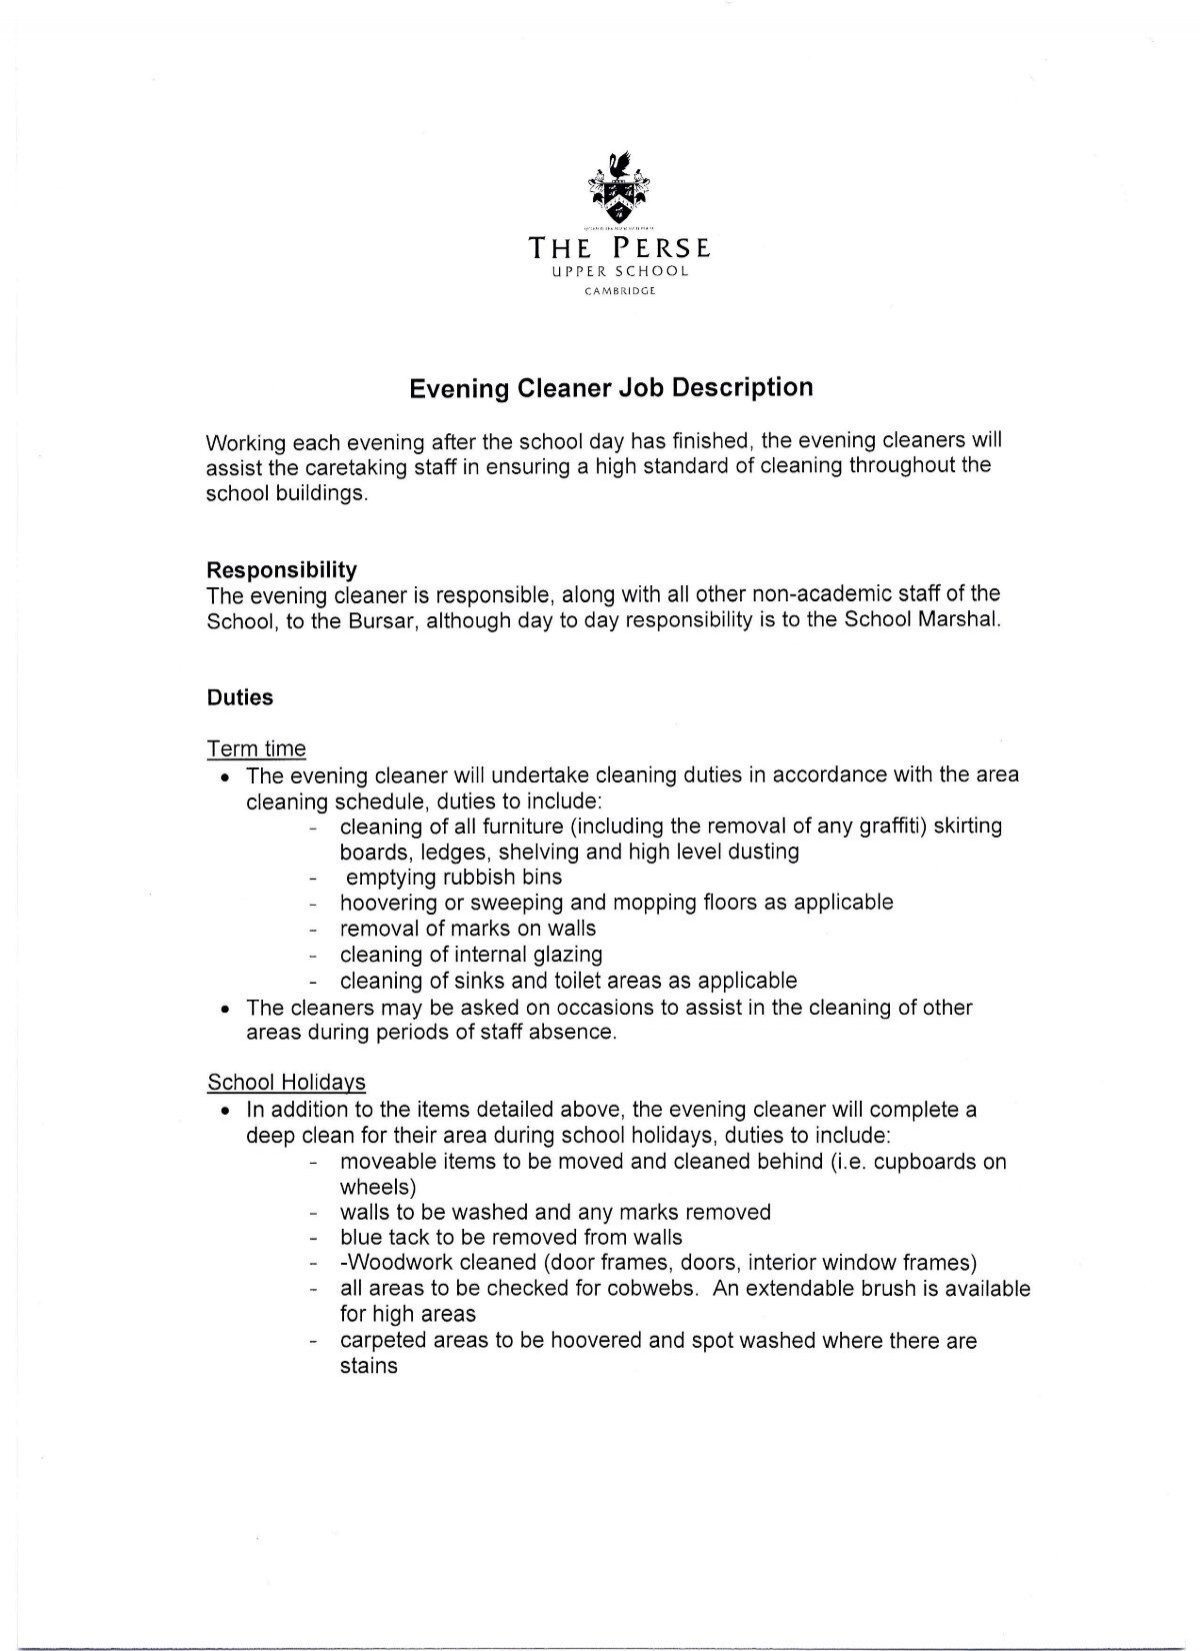 THE PERSE Evening Cleaner Job Description - The Perse School